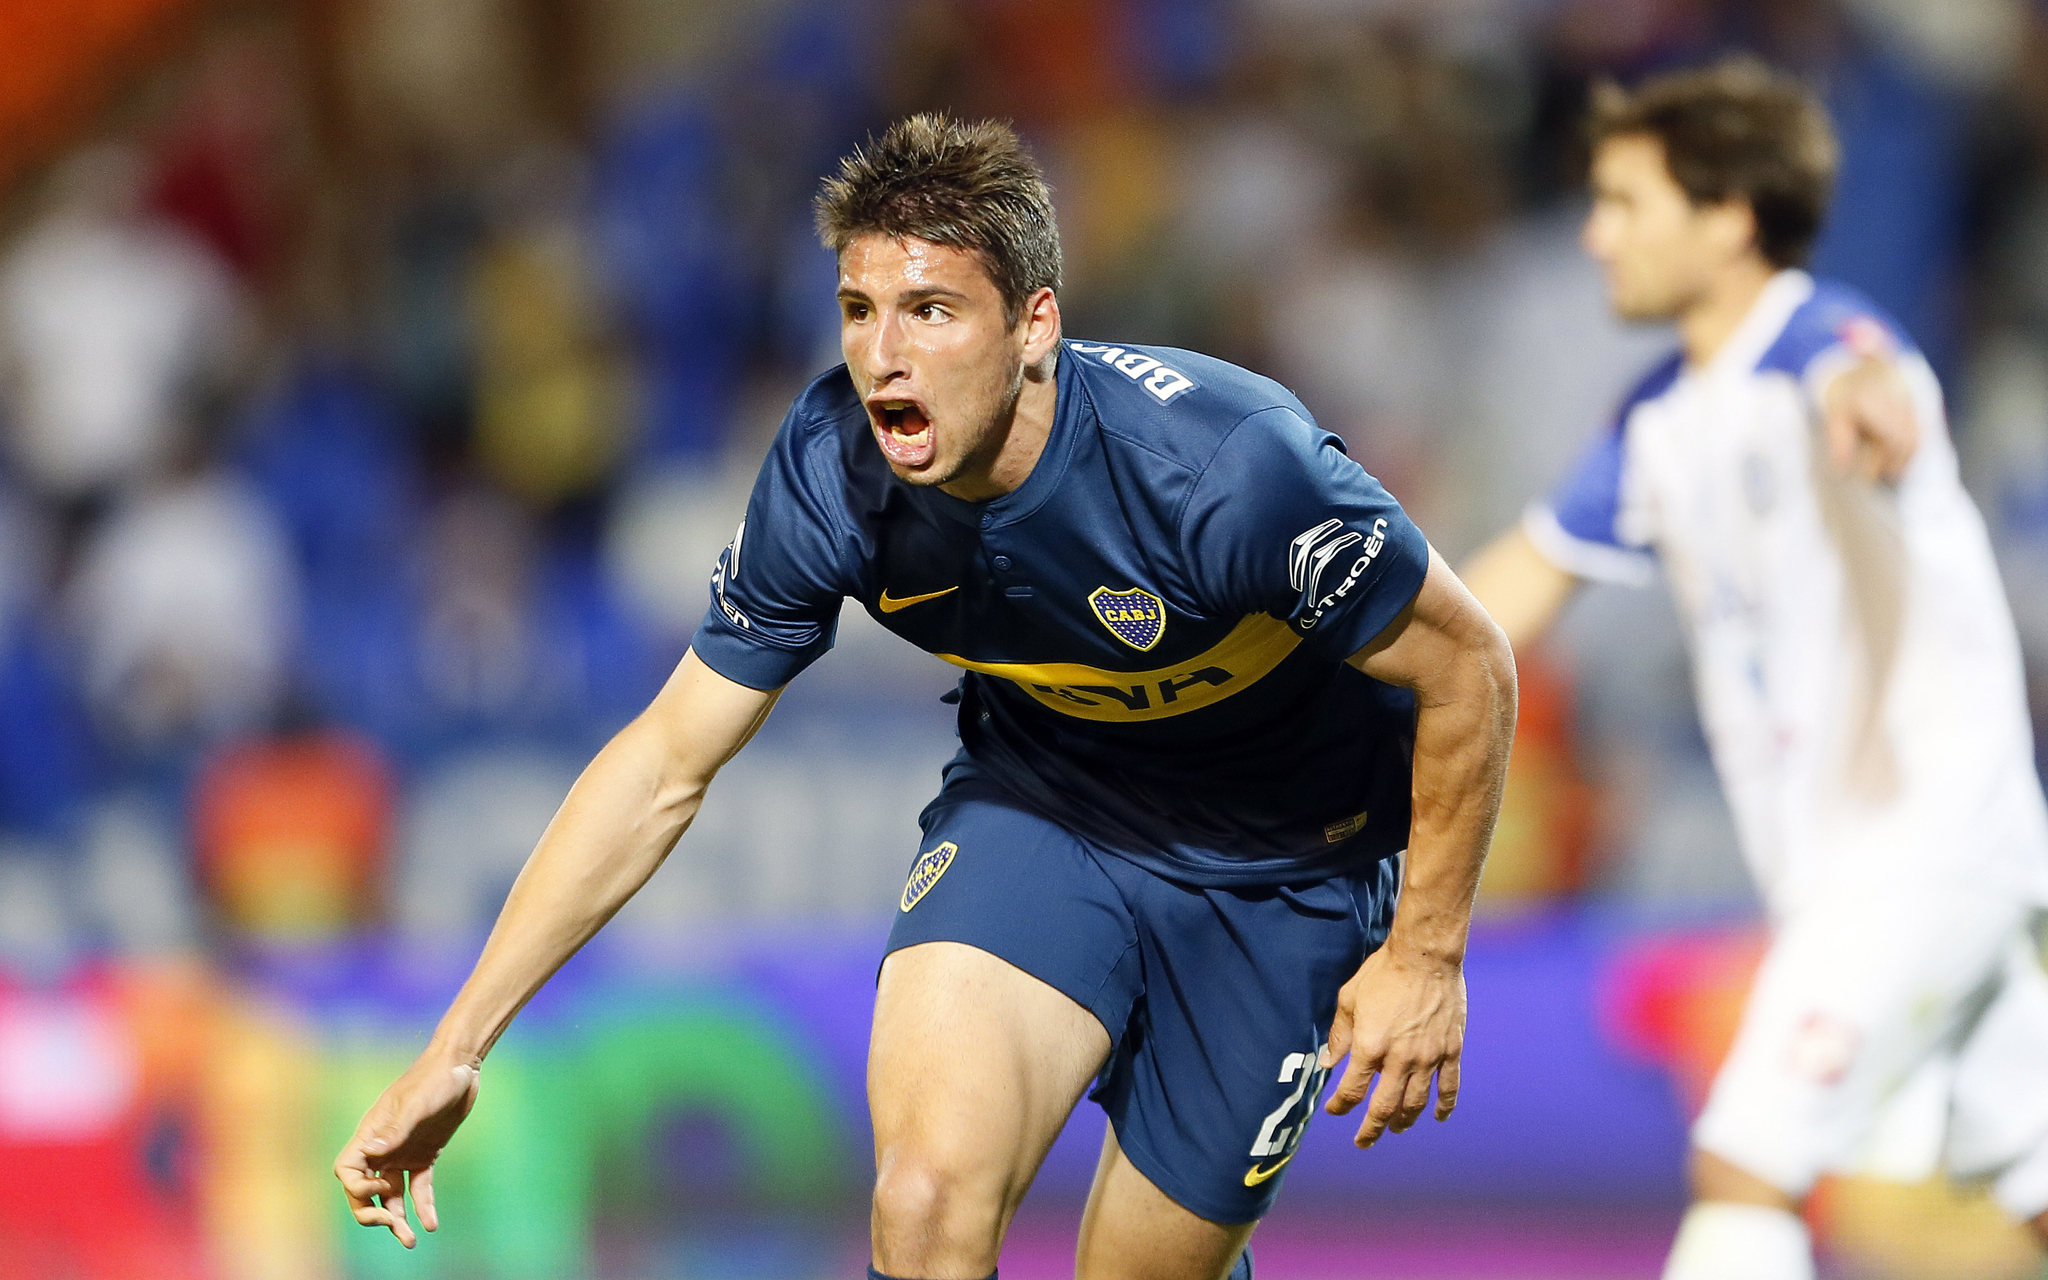 Calleri: “The EPL suits my characteristics but nothing is decided”